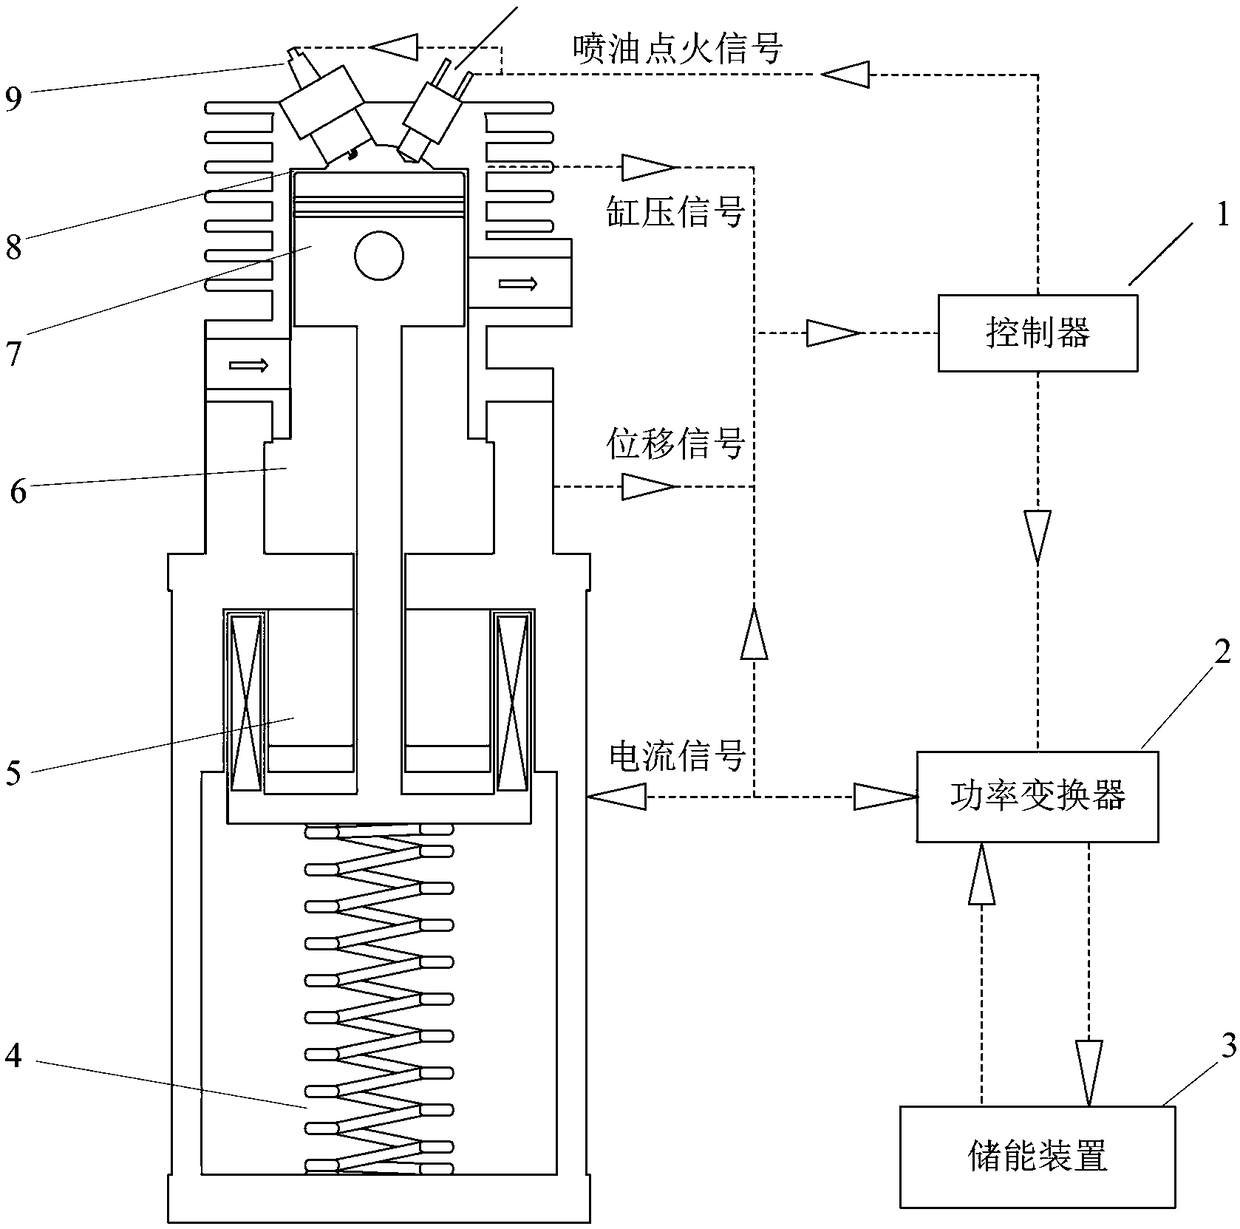 Stable operation process control method for free piston engine